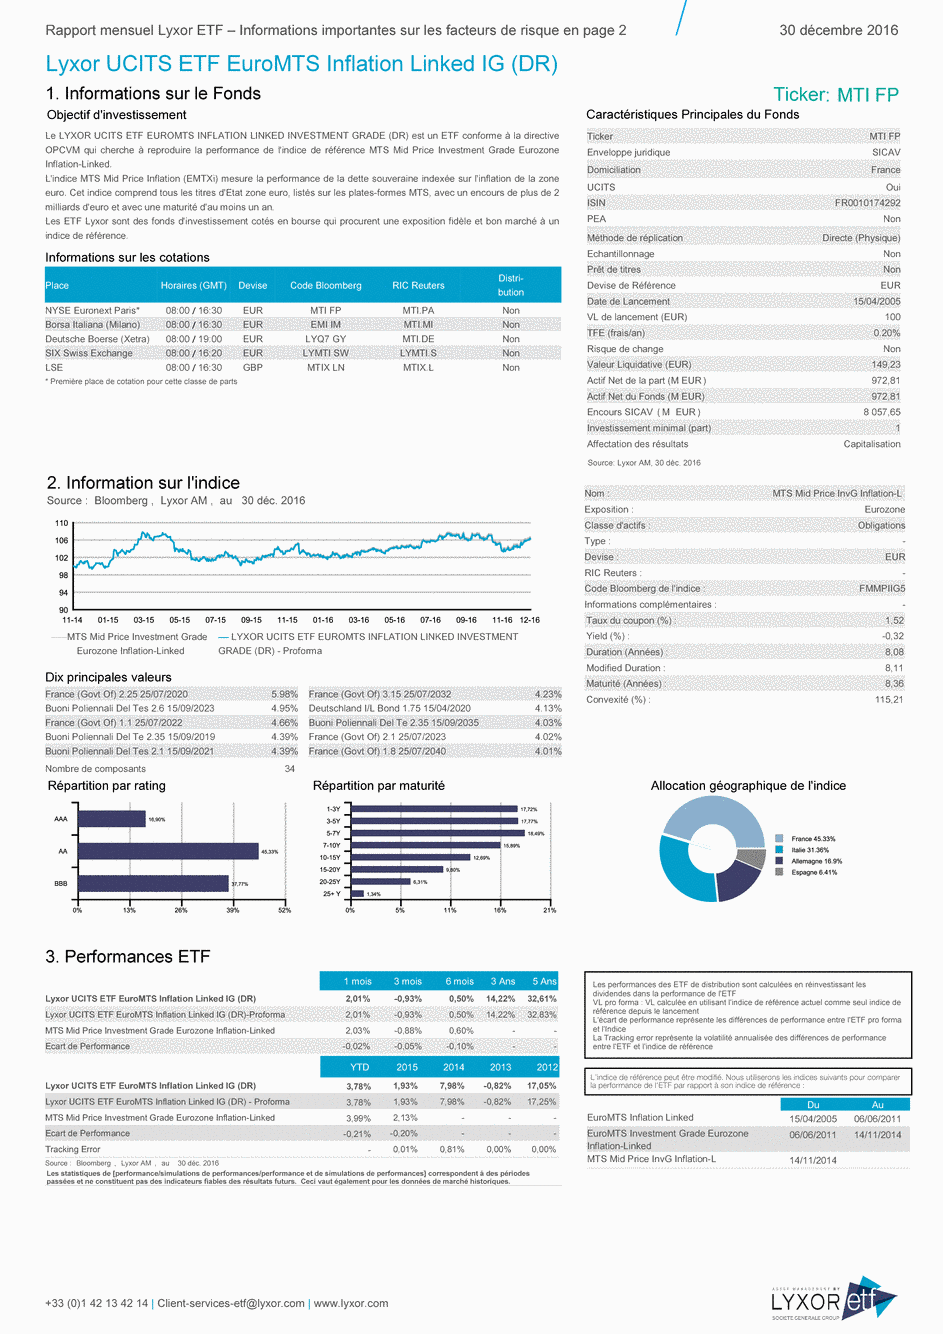 Reporting LYXOR UCITS ETF EUROMTS INFLATION LINKED INVESTMENT GRADE (DR) - 30/12/2016 - Français